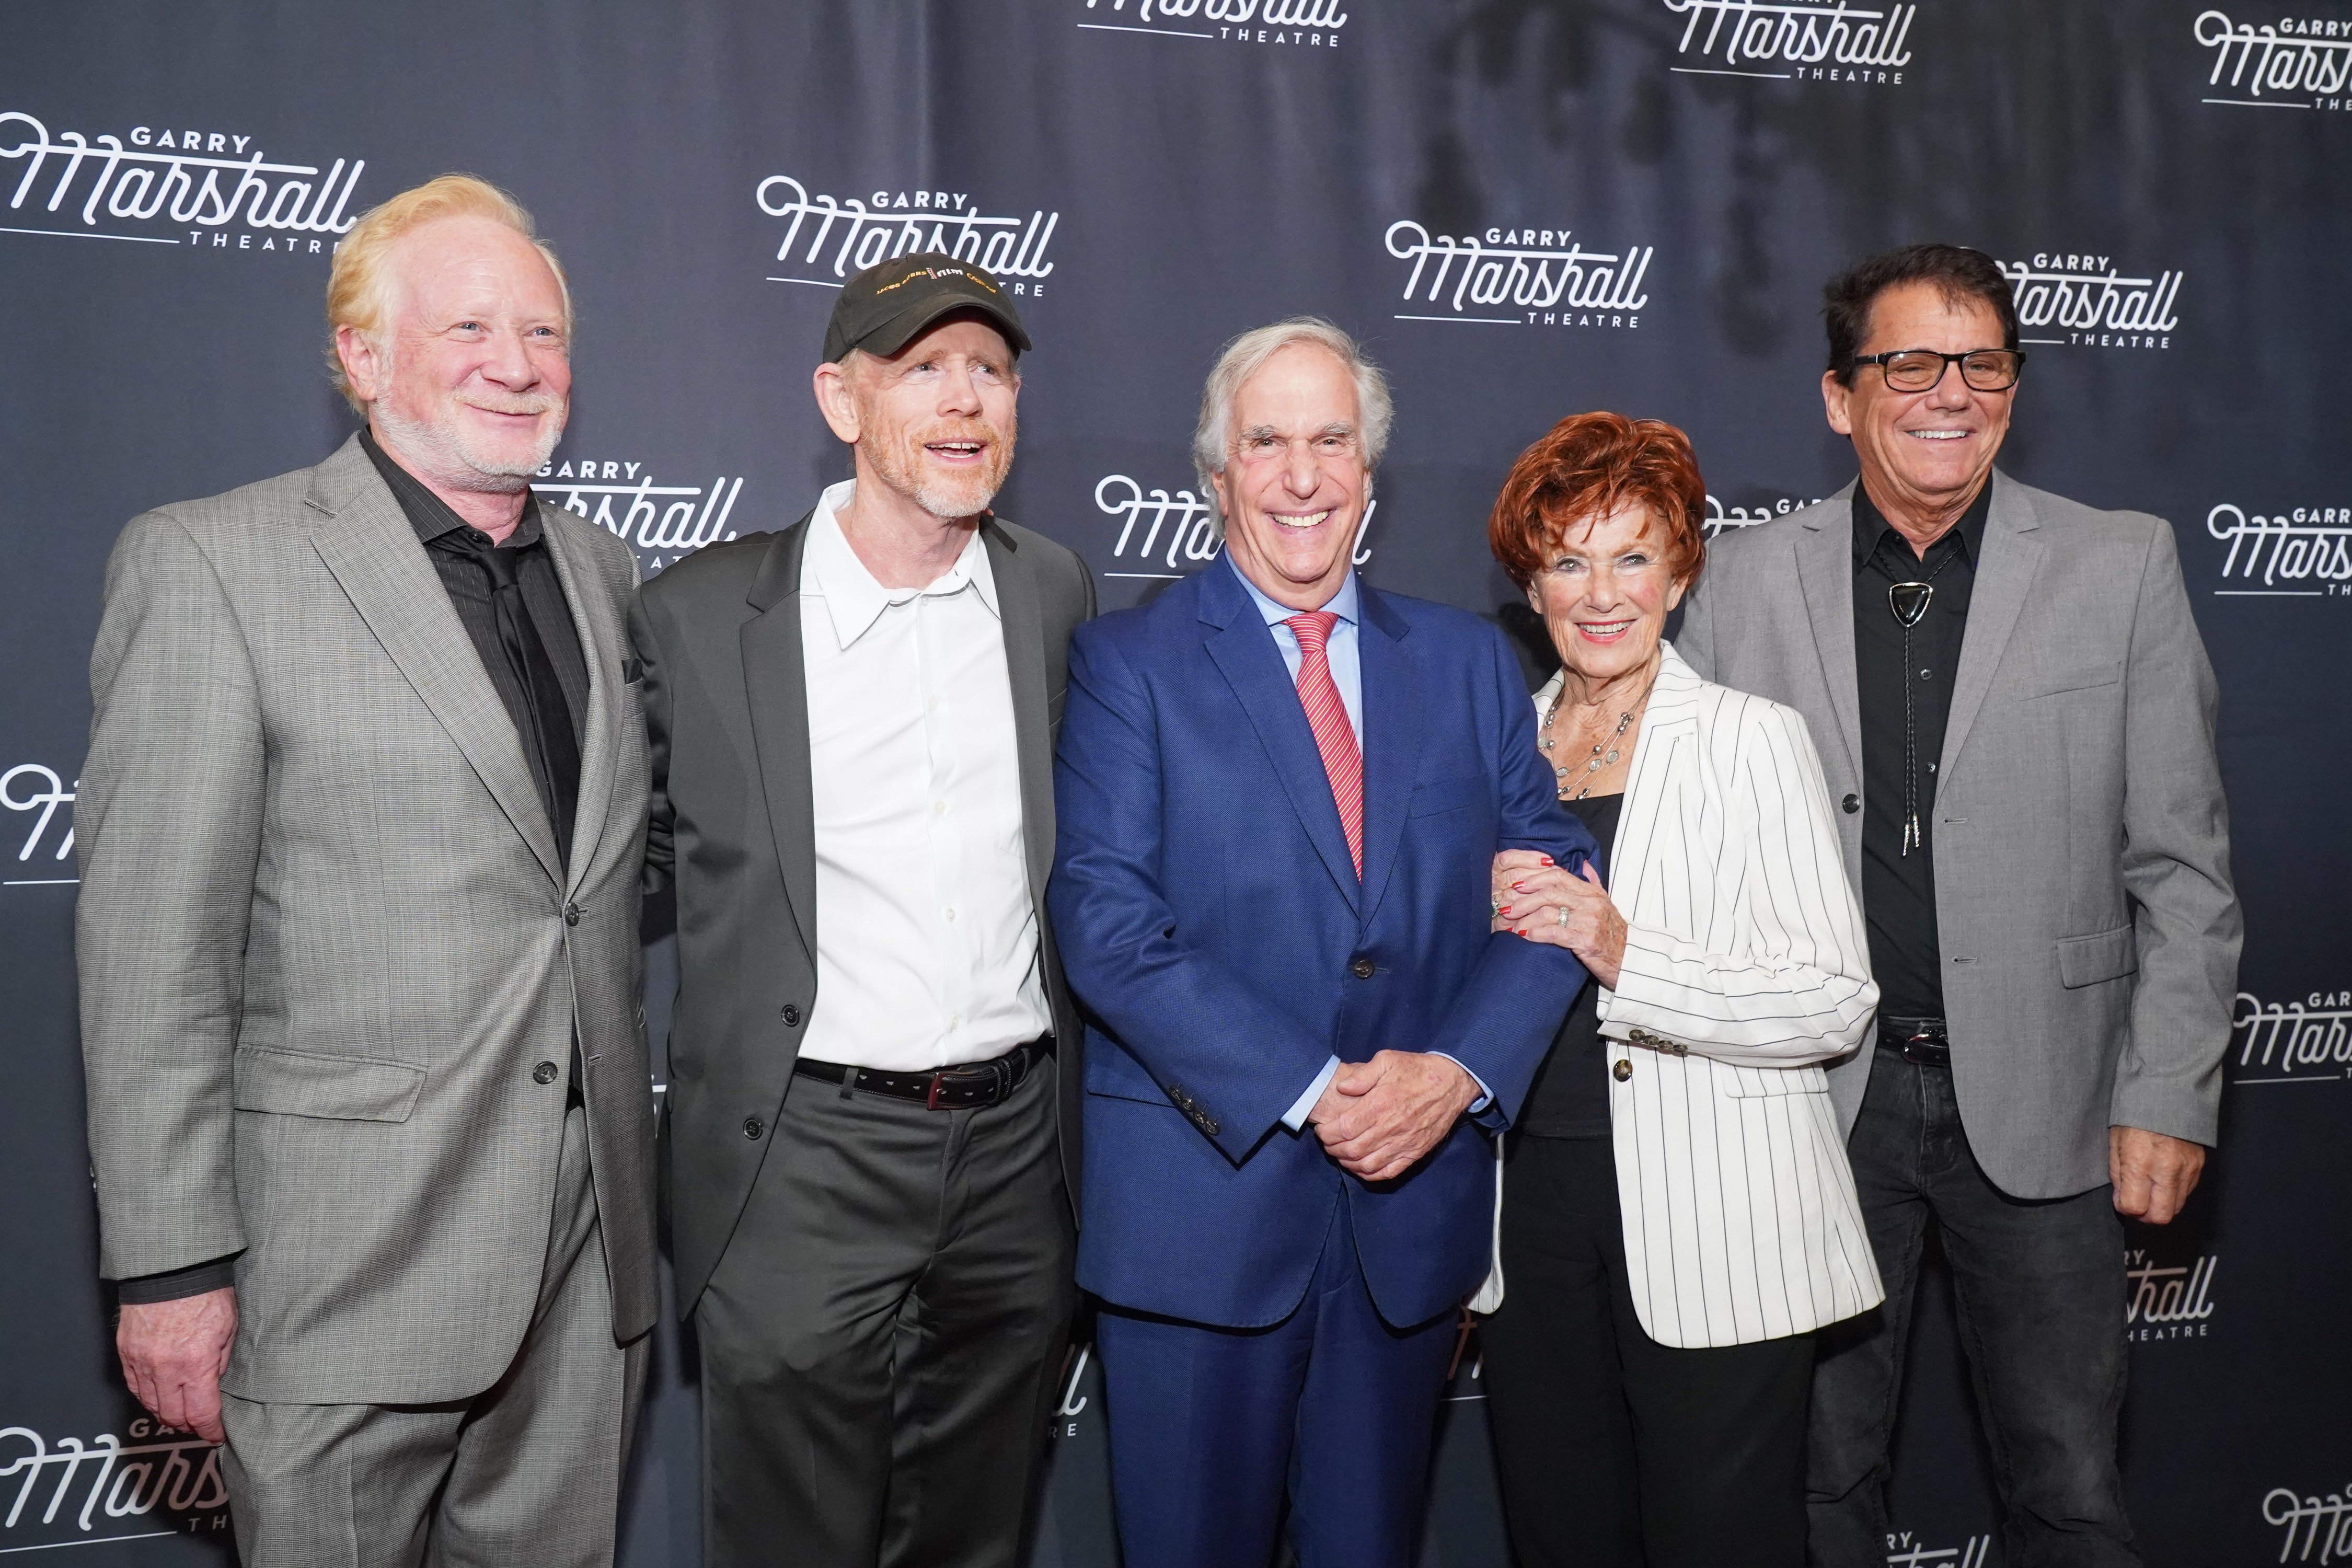 Original cast of "Happy Days," Don Most, Ron Howard, Henry Winkler, Marion Ross, and Anson Williams at the Garry Marshall Theatre's 3rd Annual Founder's Gala on November 13, 2019, in Los Angeles | Source: Getty Images